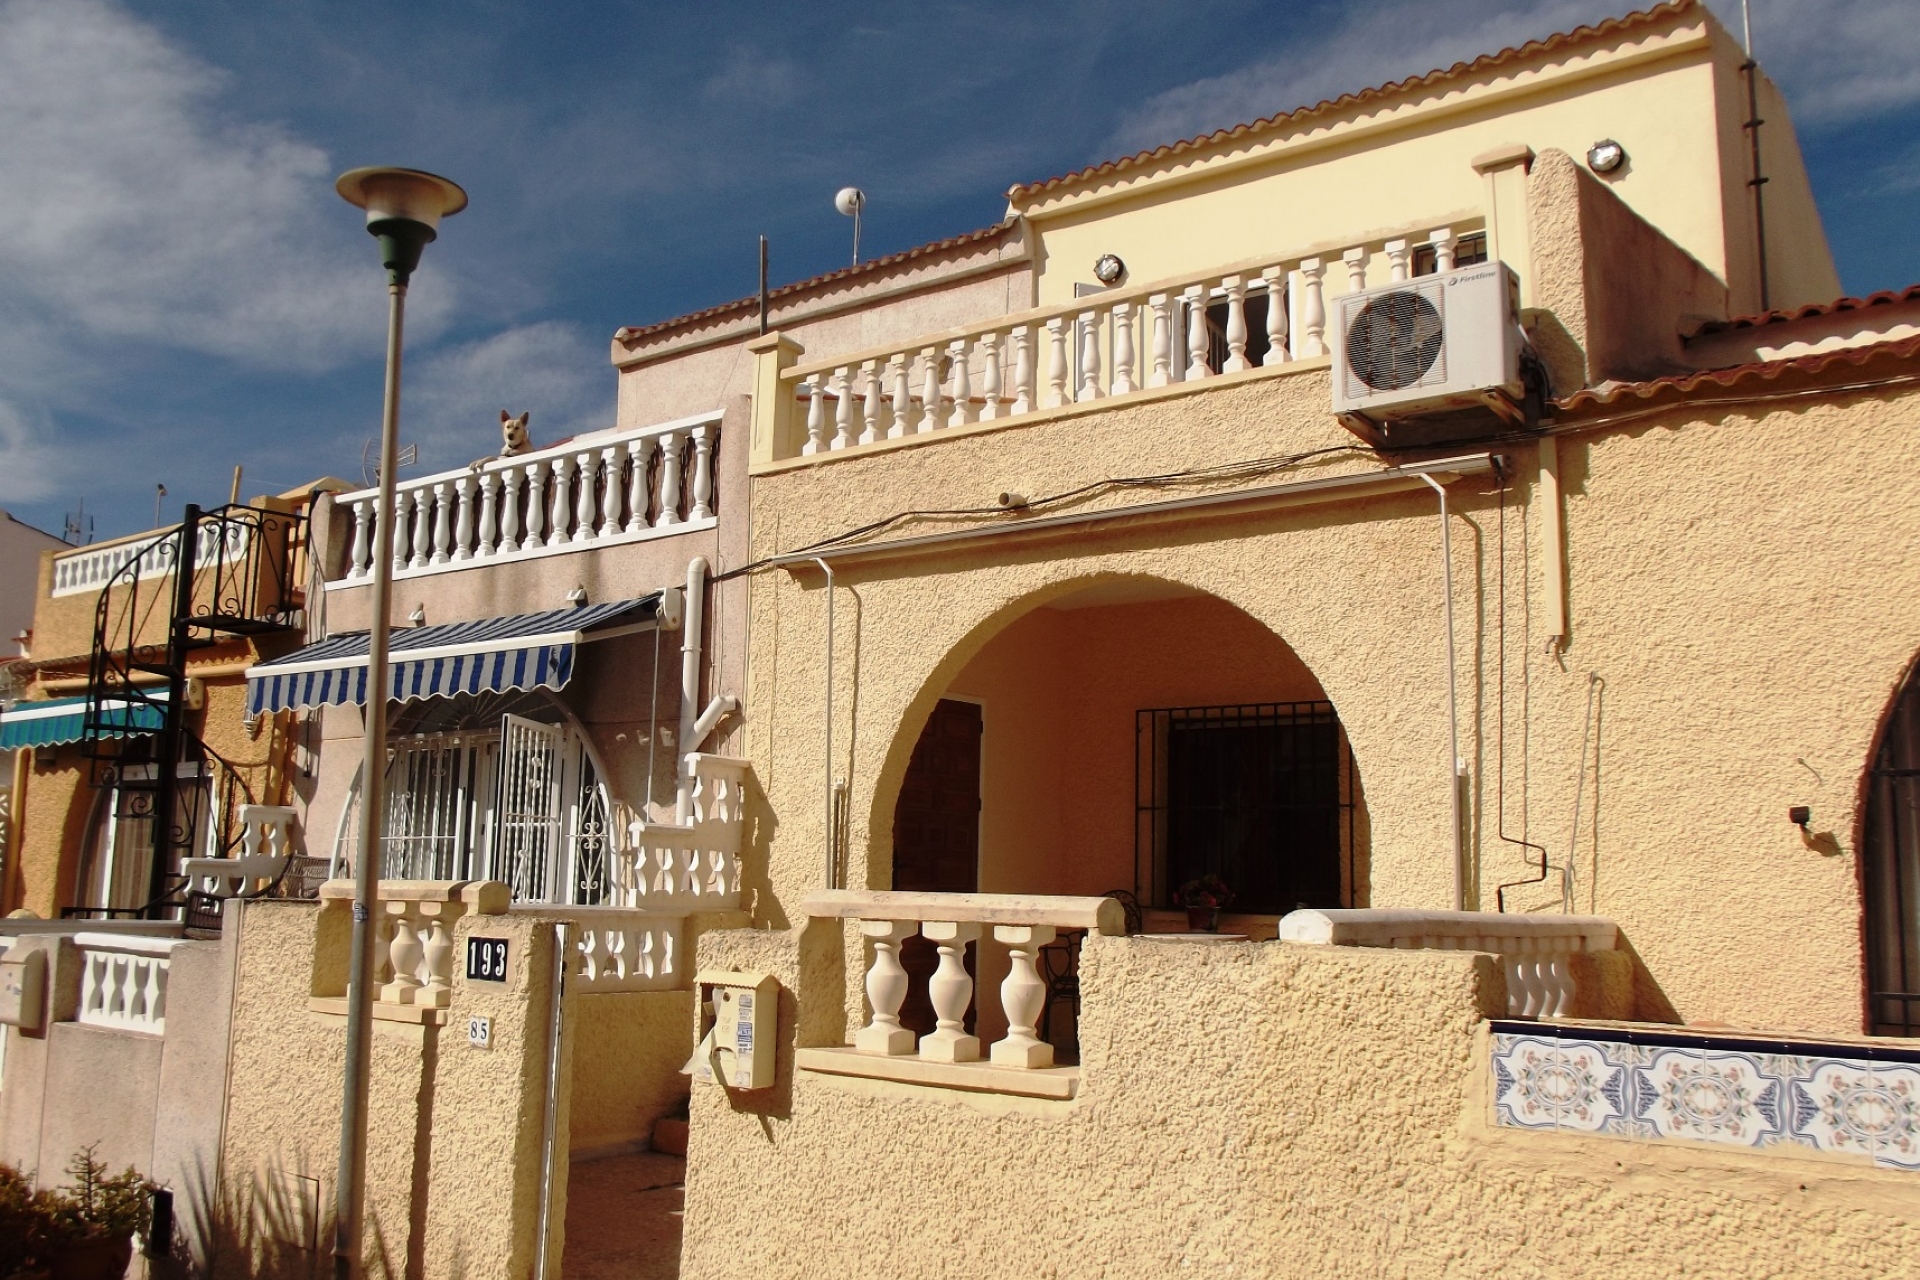 Property on Hold - Townhouse for sale - Torrevieja - La Siesta